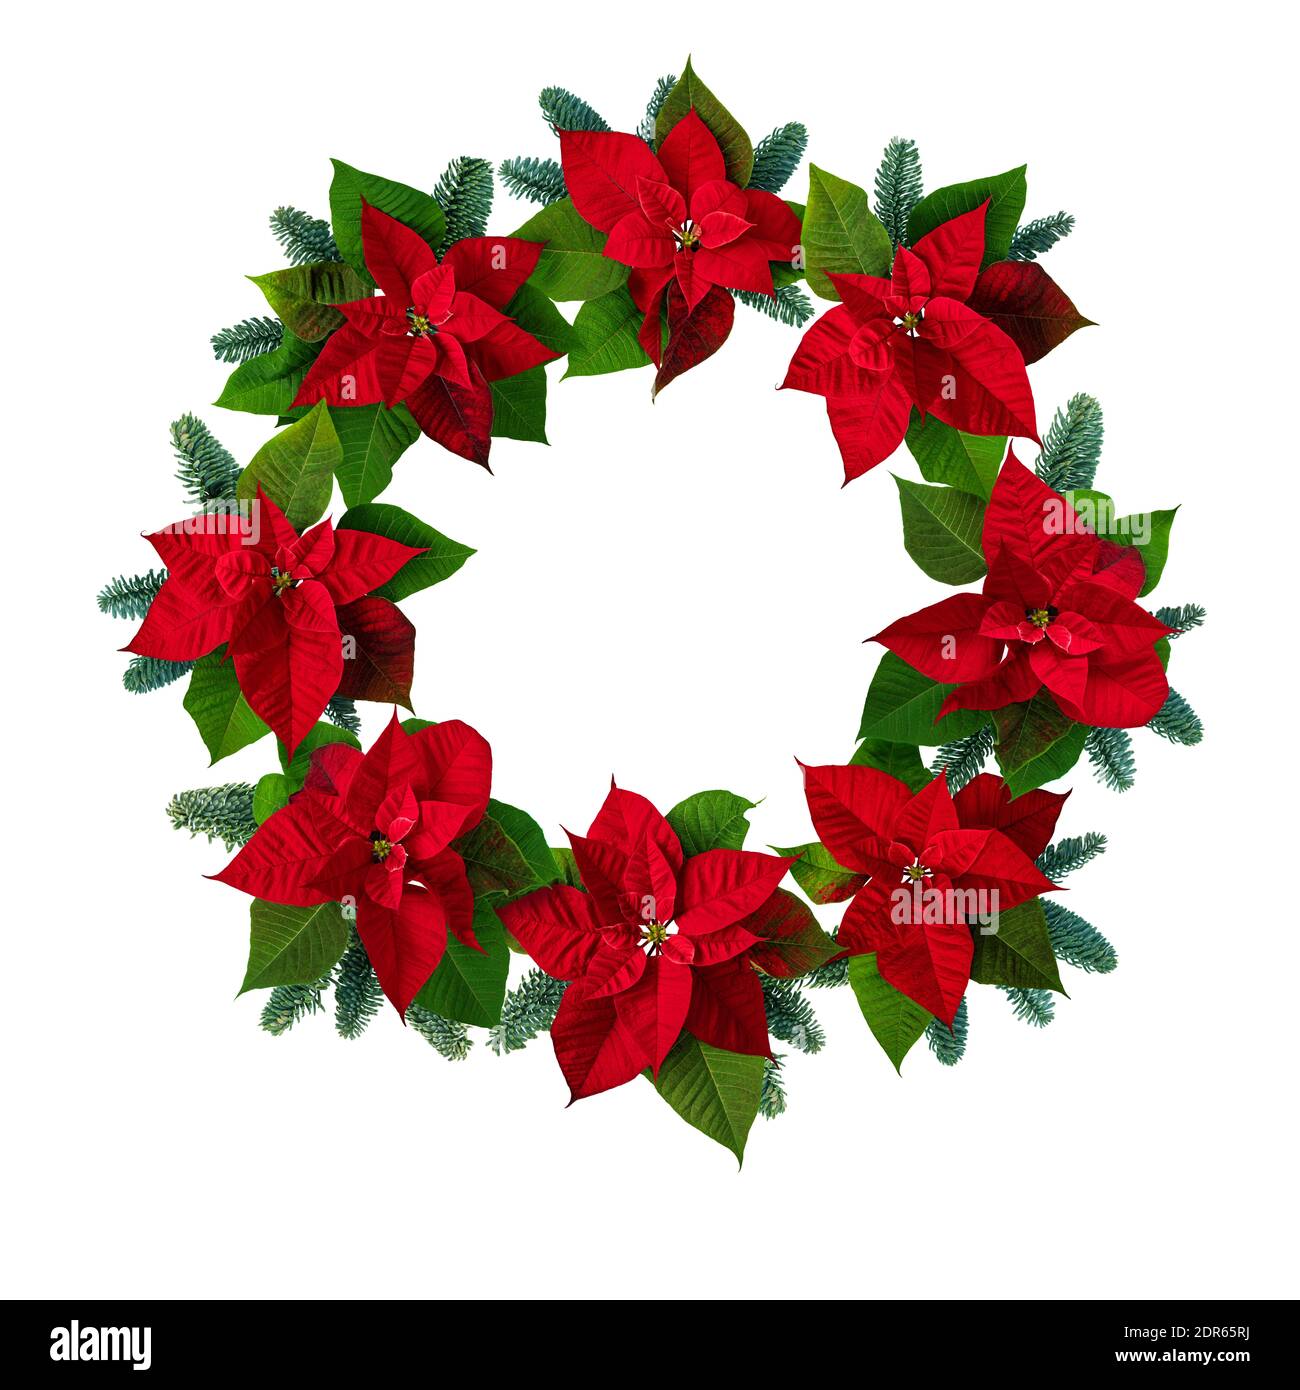 Poinsettia Christmas Eve flowers and blue noble fir tree branches wreath isolated on white. Flor de Pascua. Red euphorbia pulcherrima plant. Stock Photo